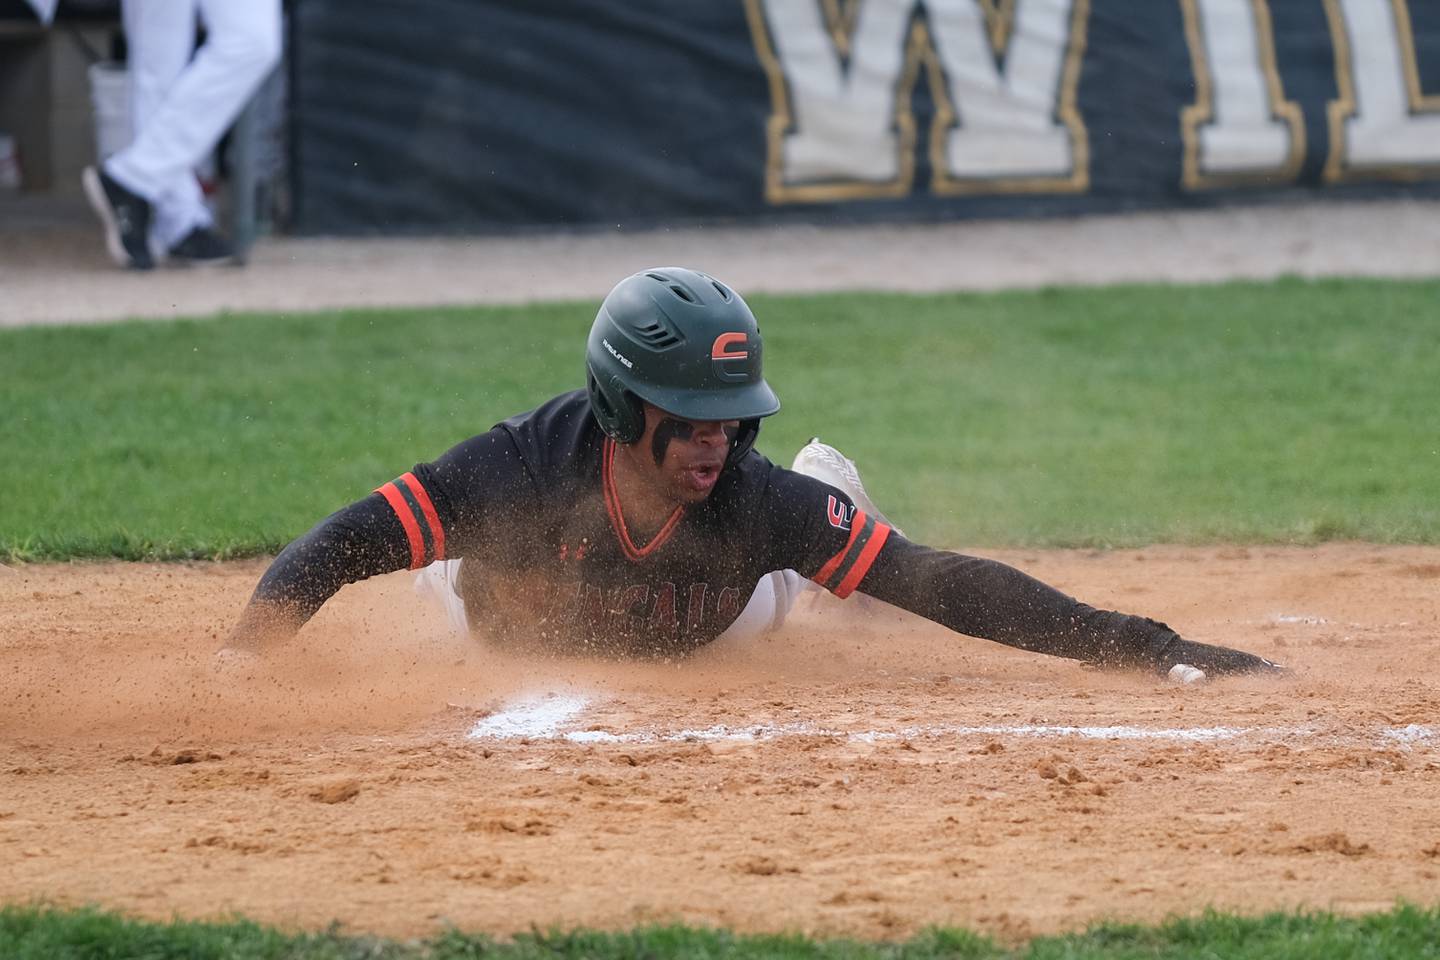 Plainfield East’s Christian Mitchelle slide home for the run against Plainfield Central. Monday, April 25, 2022, in Plainfield.